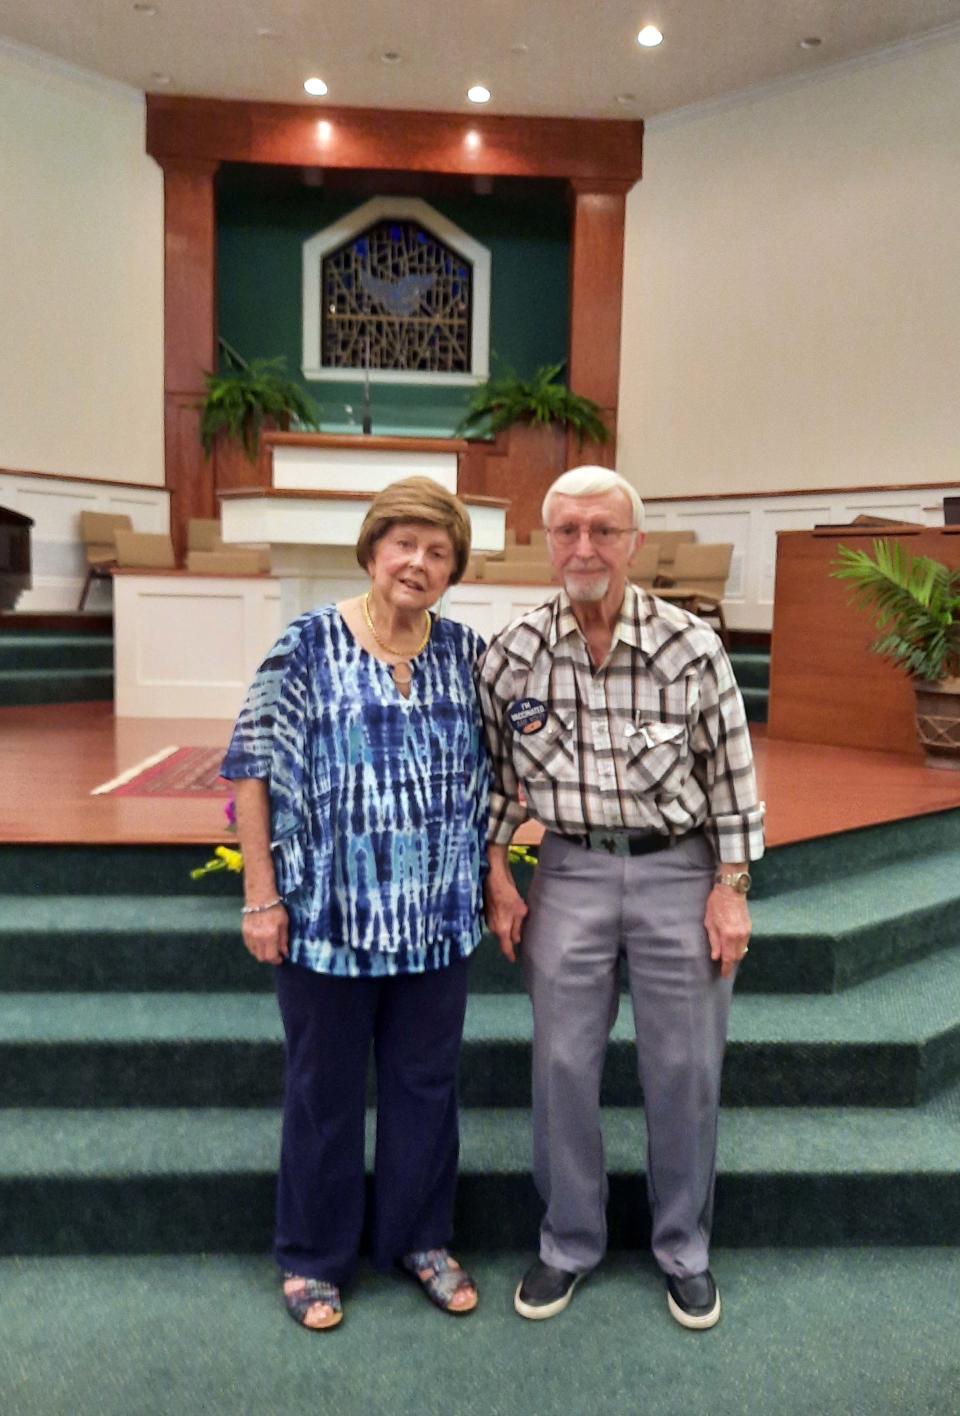 Marti and Joe Shearer pose for a picture in the Panama City church where they were married. The couple will celebrate their 70th wedding anniversary Dec. 4 in Niceville.